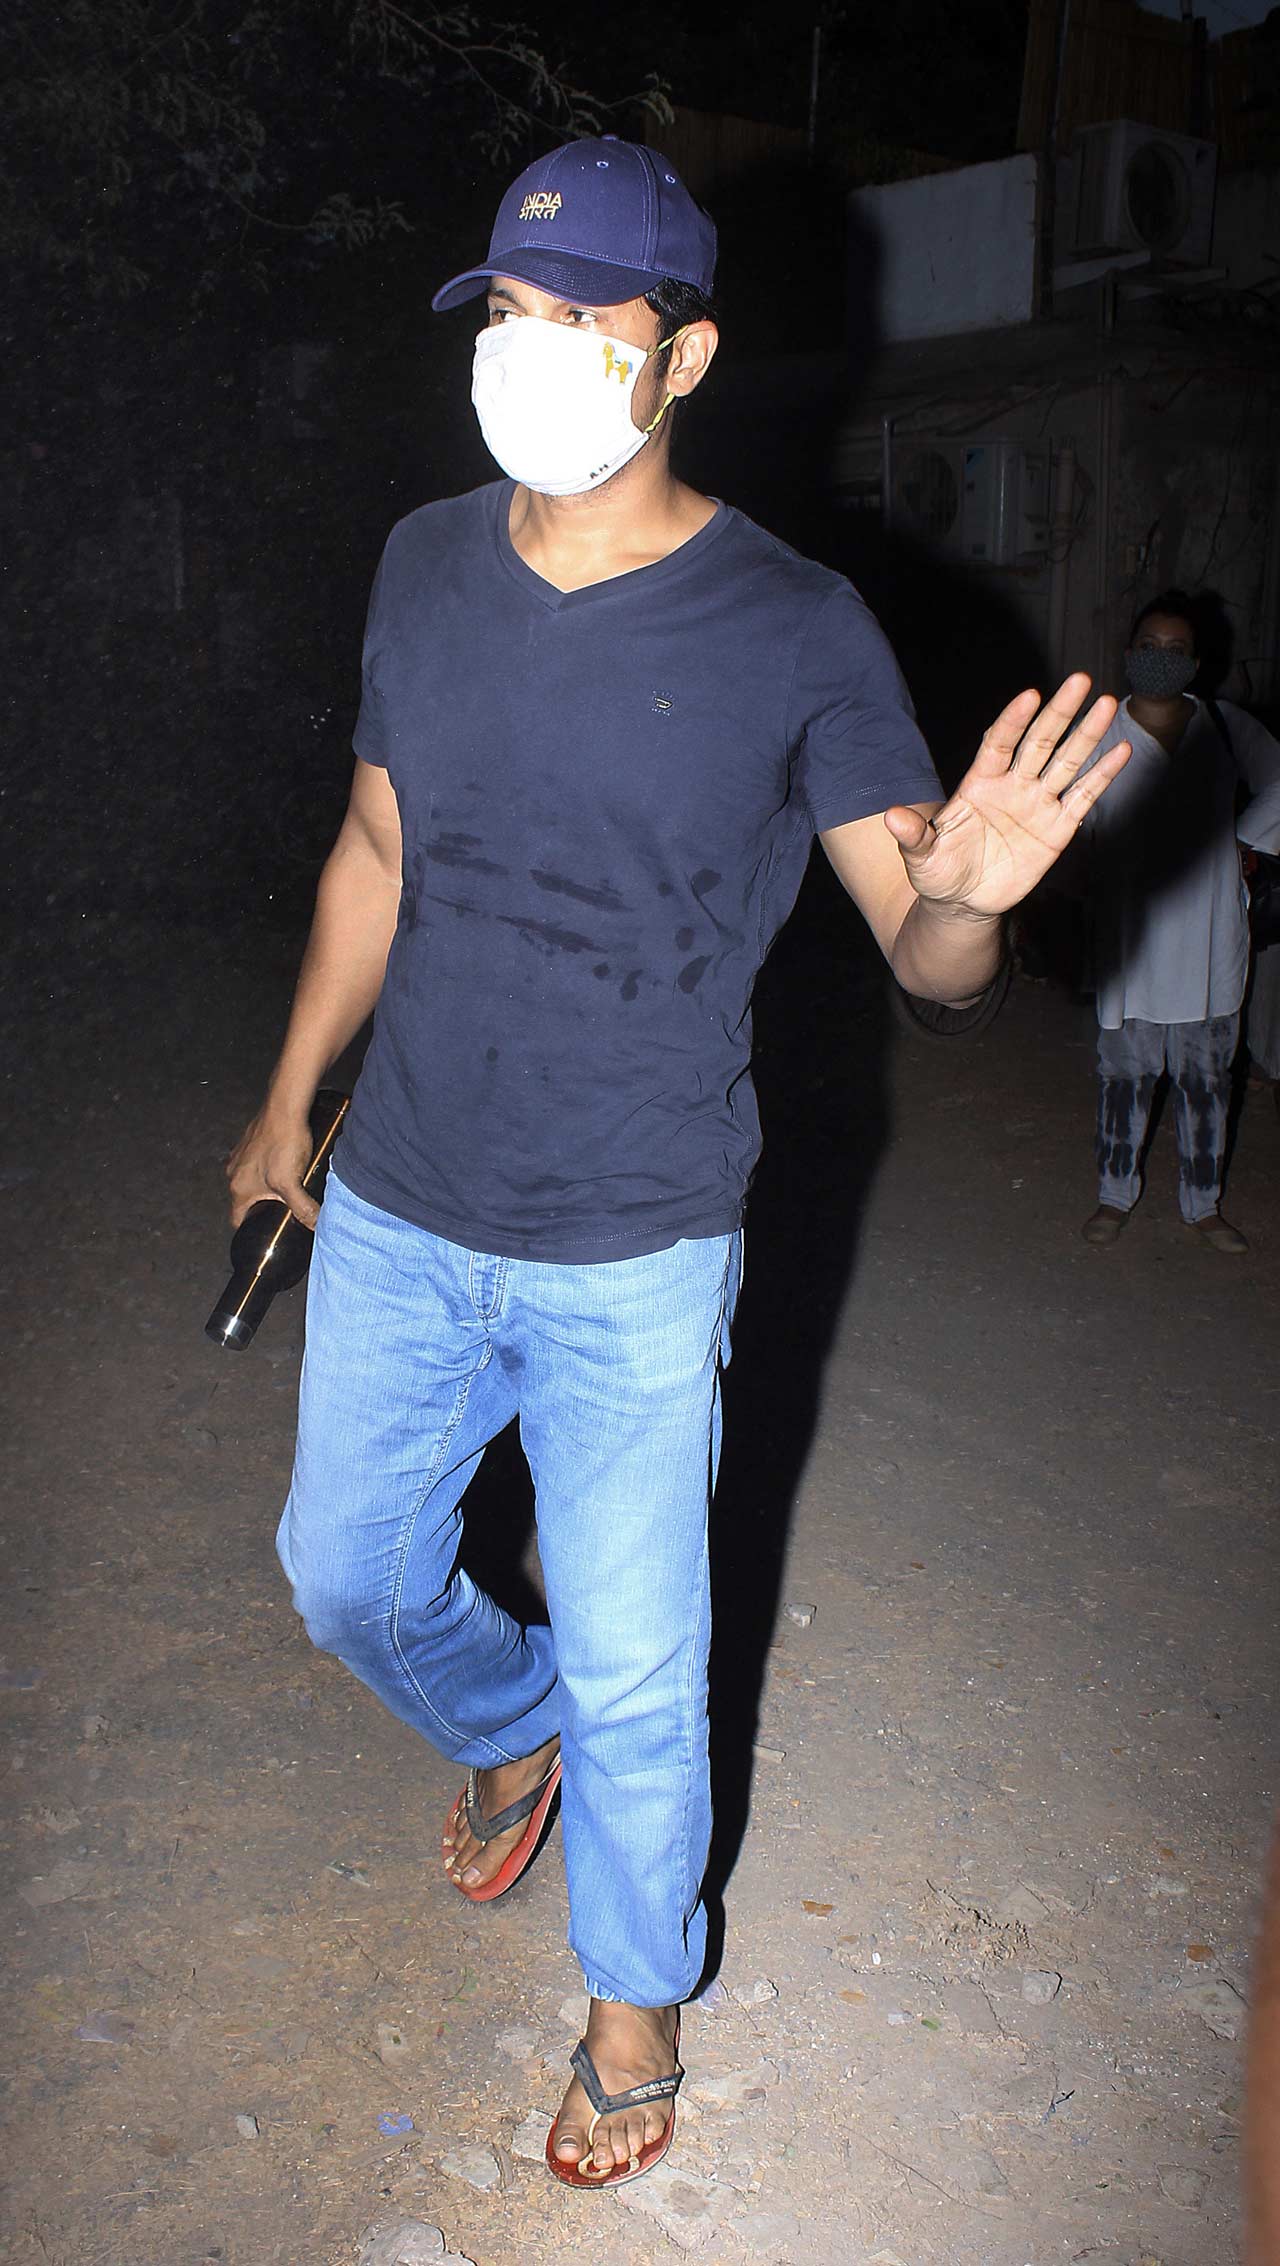 Randeep Hooda was also clicked by the paparazzi in the city and he could be seen waving them in his cool and causal style. The actor has two films coming up, one is Radhe: Your Most Wanted Bhai with Salman Khan and the other is Unfair and Lovely with Ileana D’Cruz.